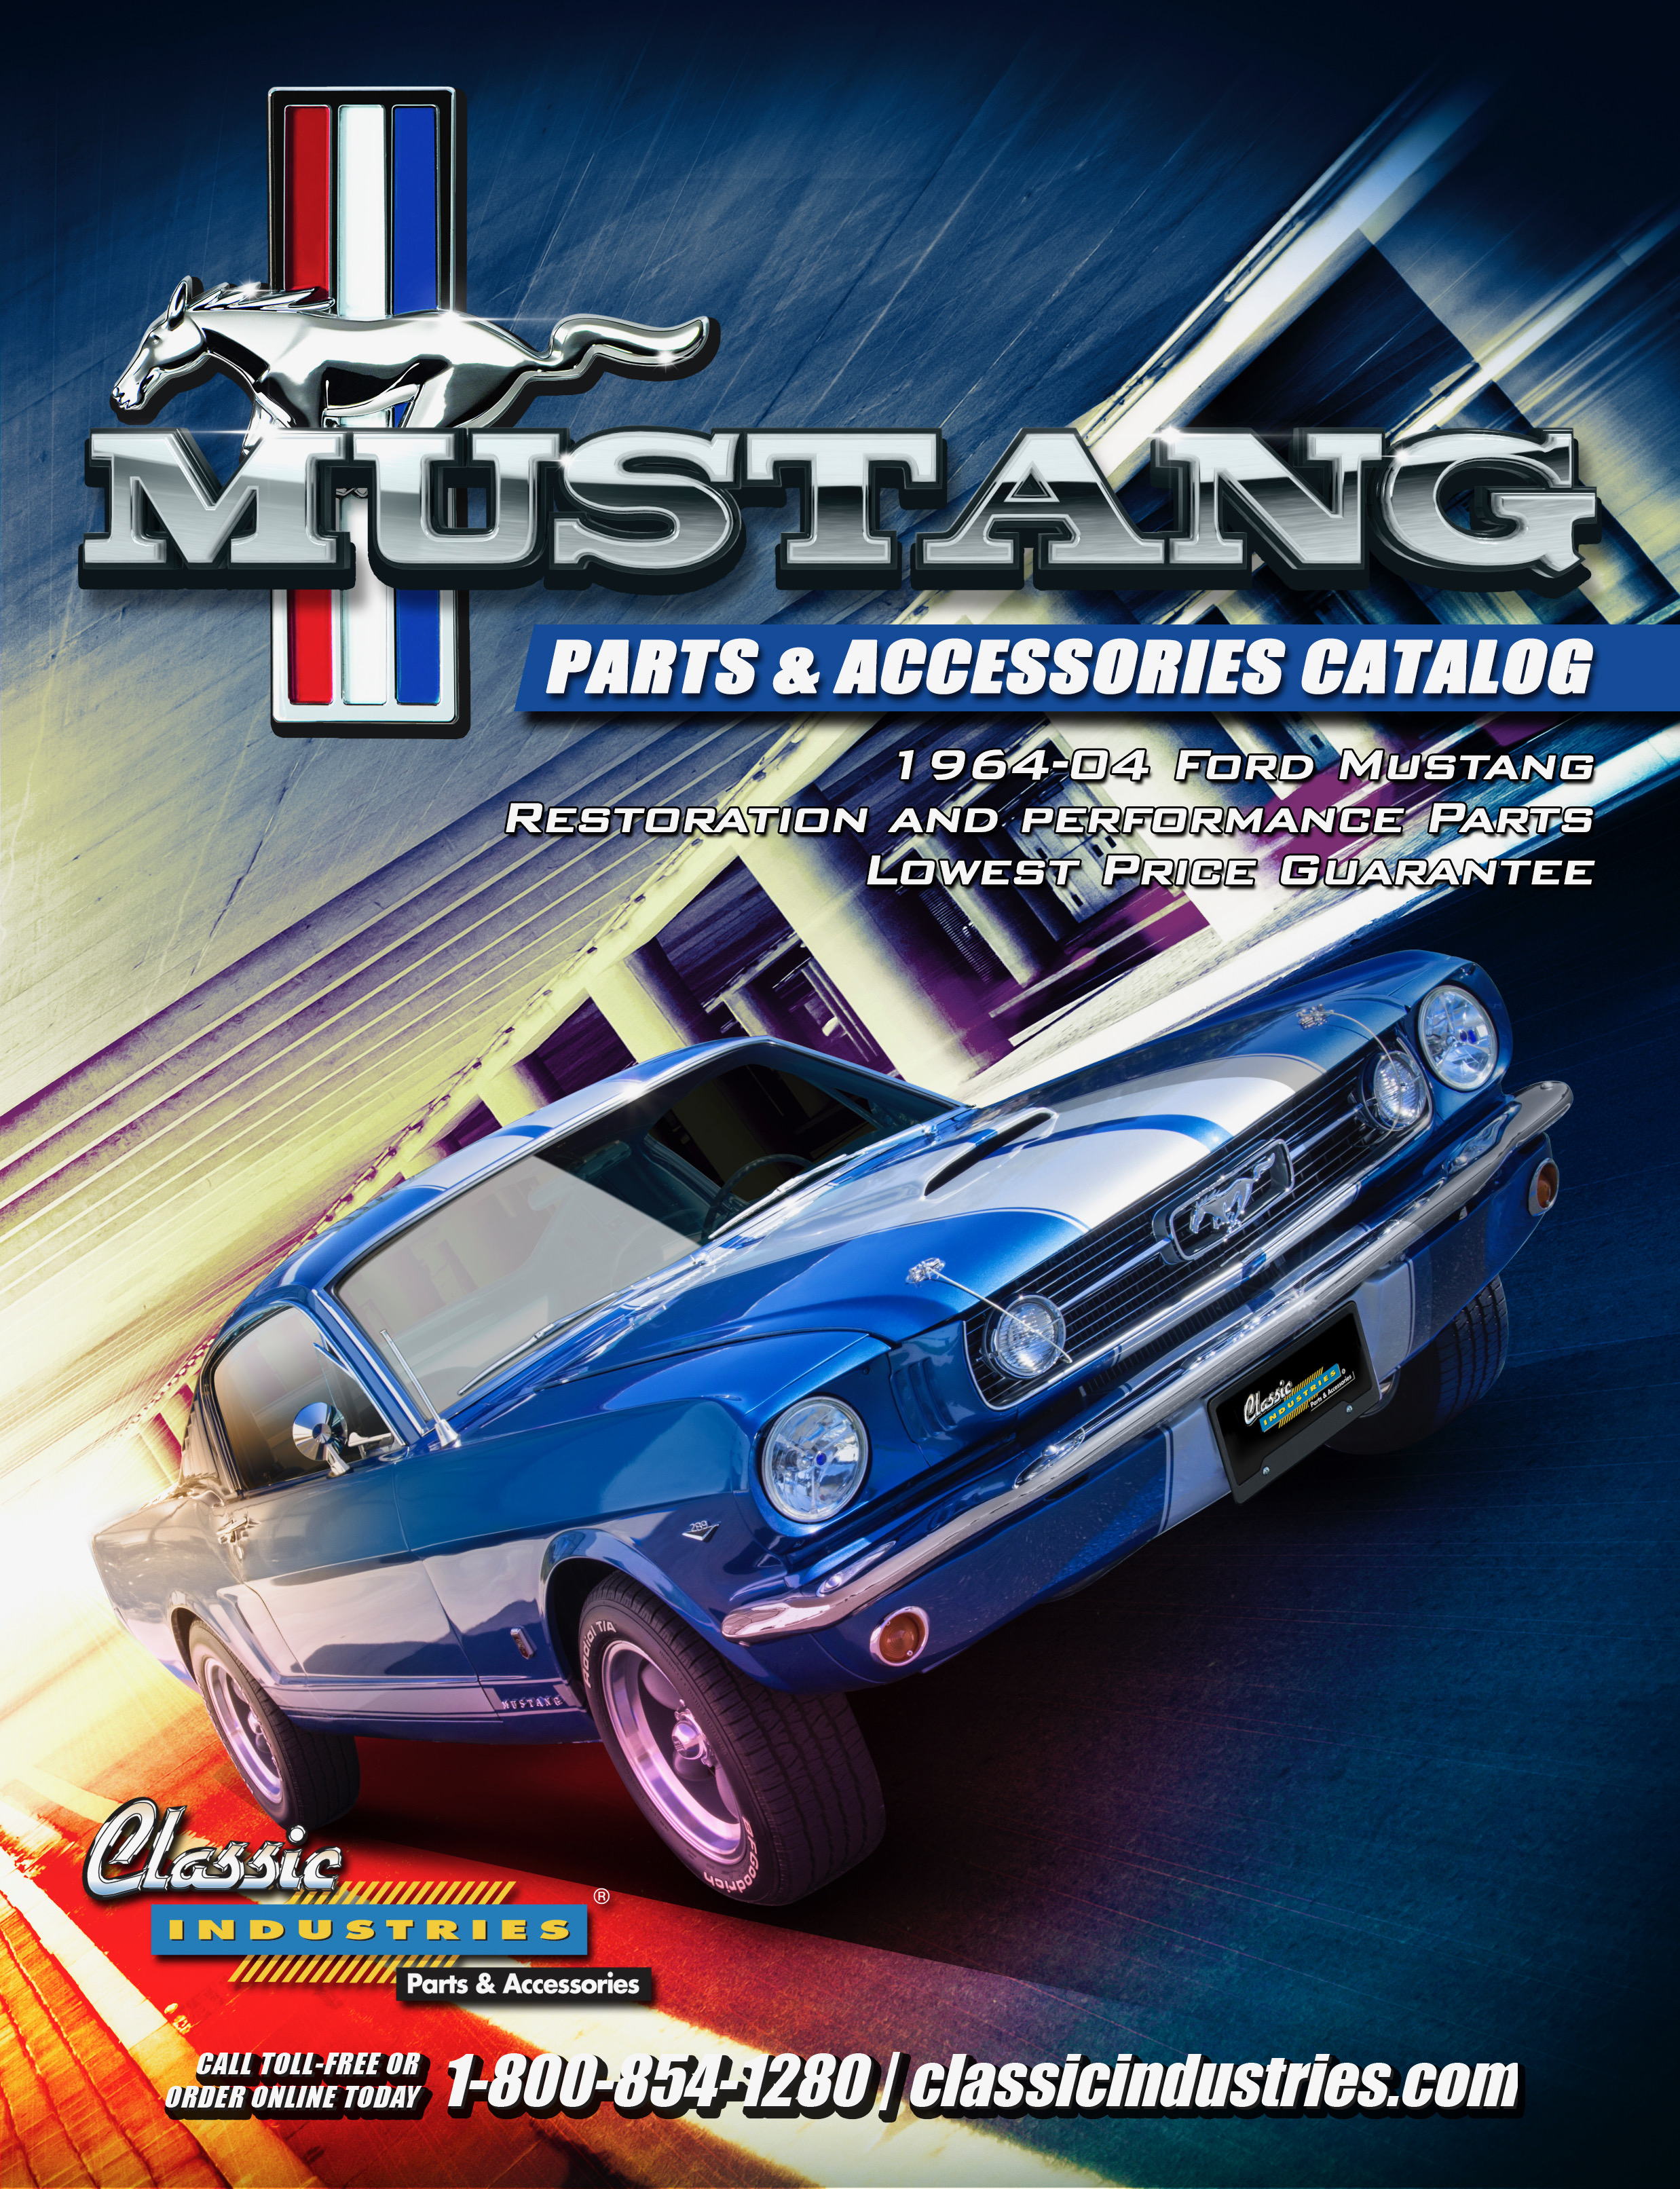 Mustang, Classic Industries launches Mustang product line, ClassicCars.com Journal